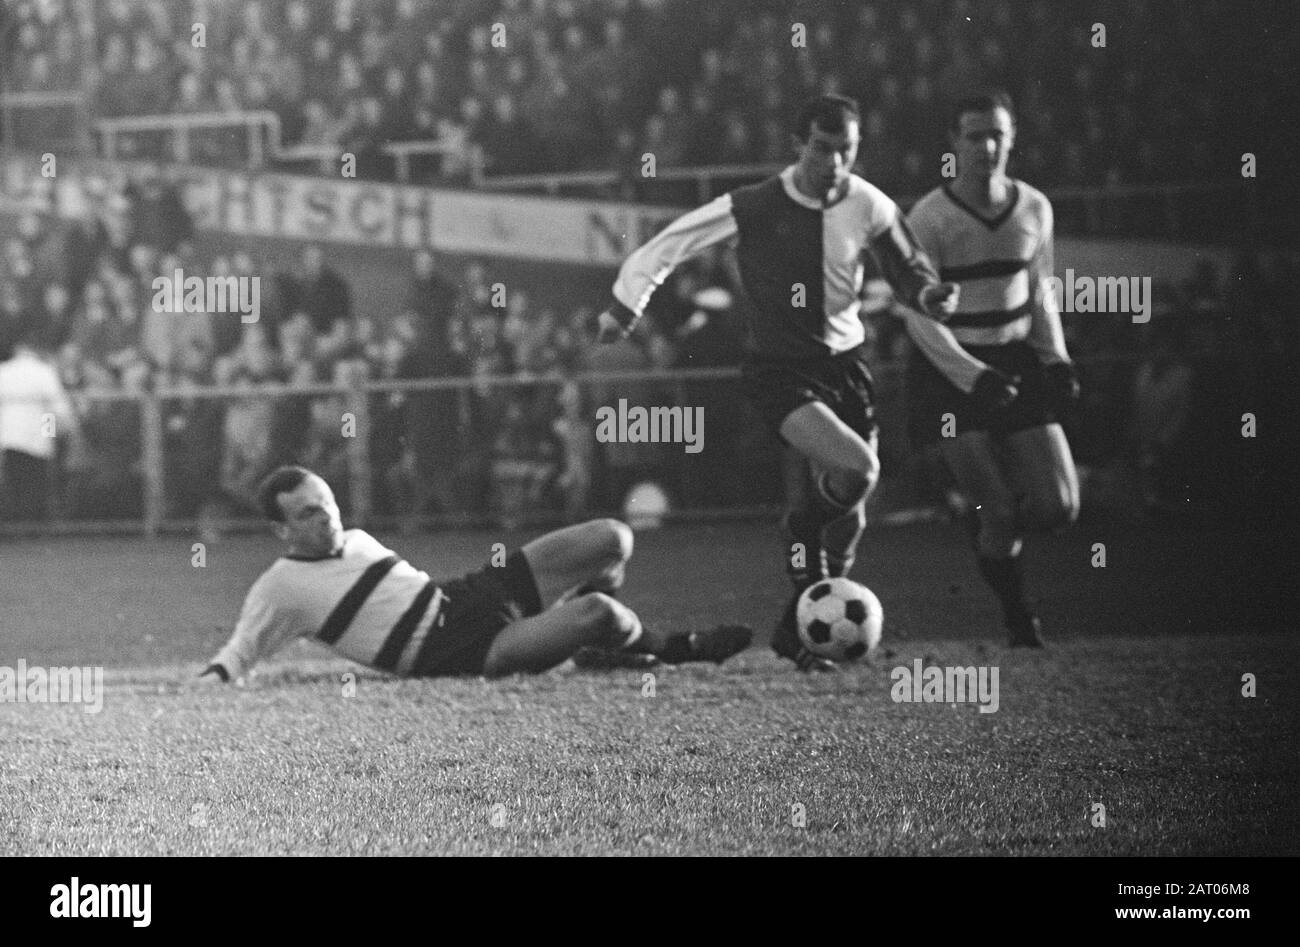 DOS against Feyenoord 3-1, Coen Moulijn is rearguard of DOS too fast afar Date: January 3, 1965 Location: Utrecht Keywords: sport, football Personal name: Moulijn, Coen Institution name: Feyenoord Stock Photo